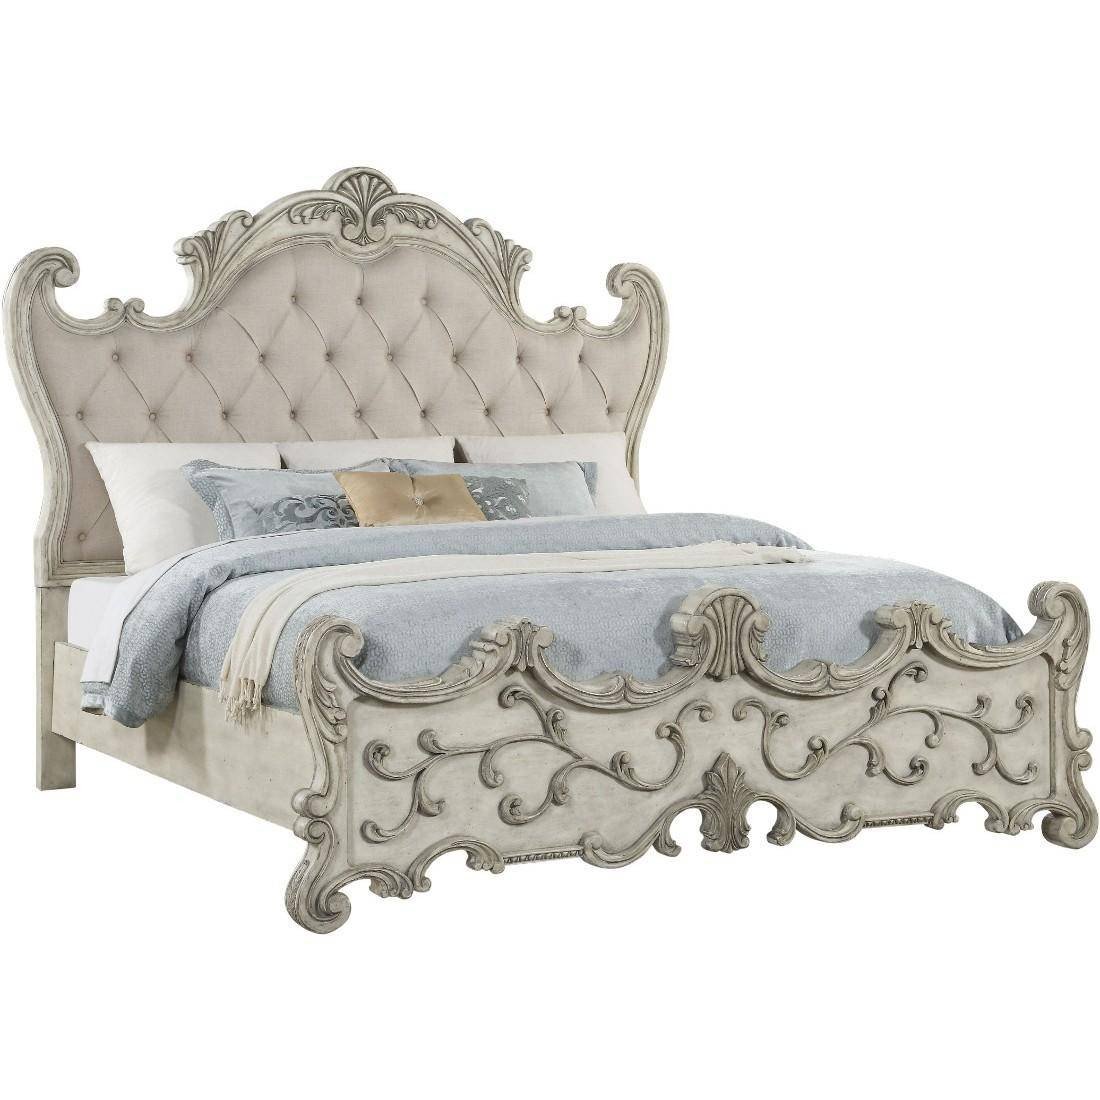 White Bedroom Set Queen Lovely Luxury King Bedroom Set 5p W Chest Antique White Fabric